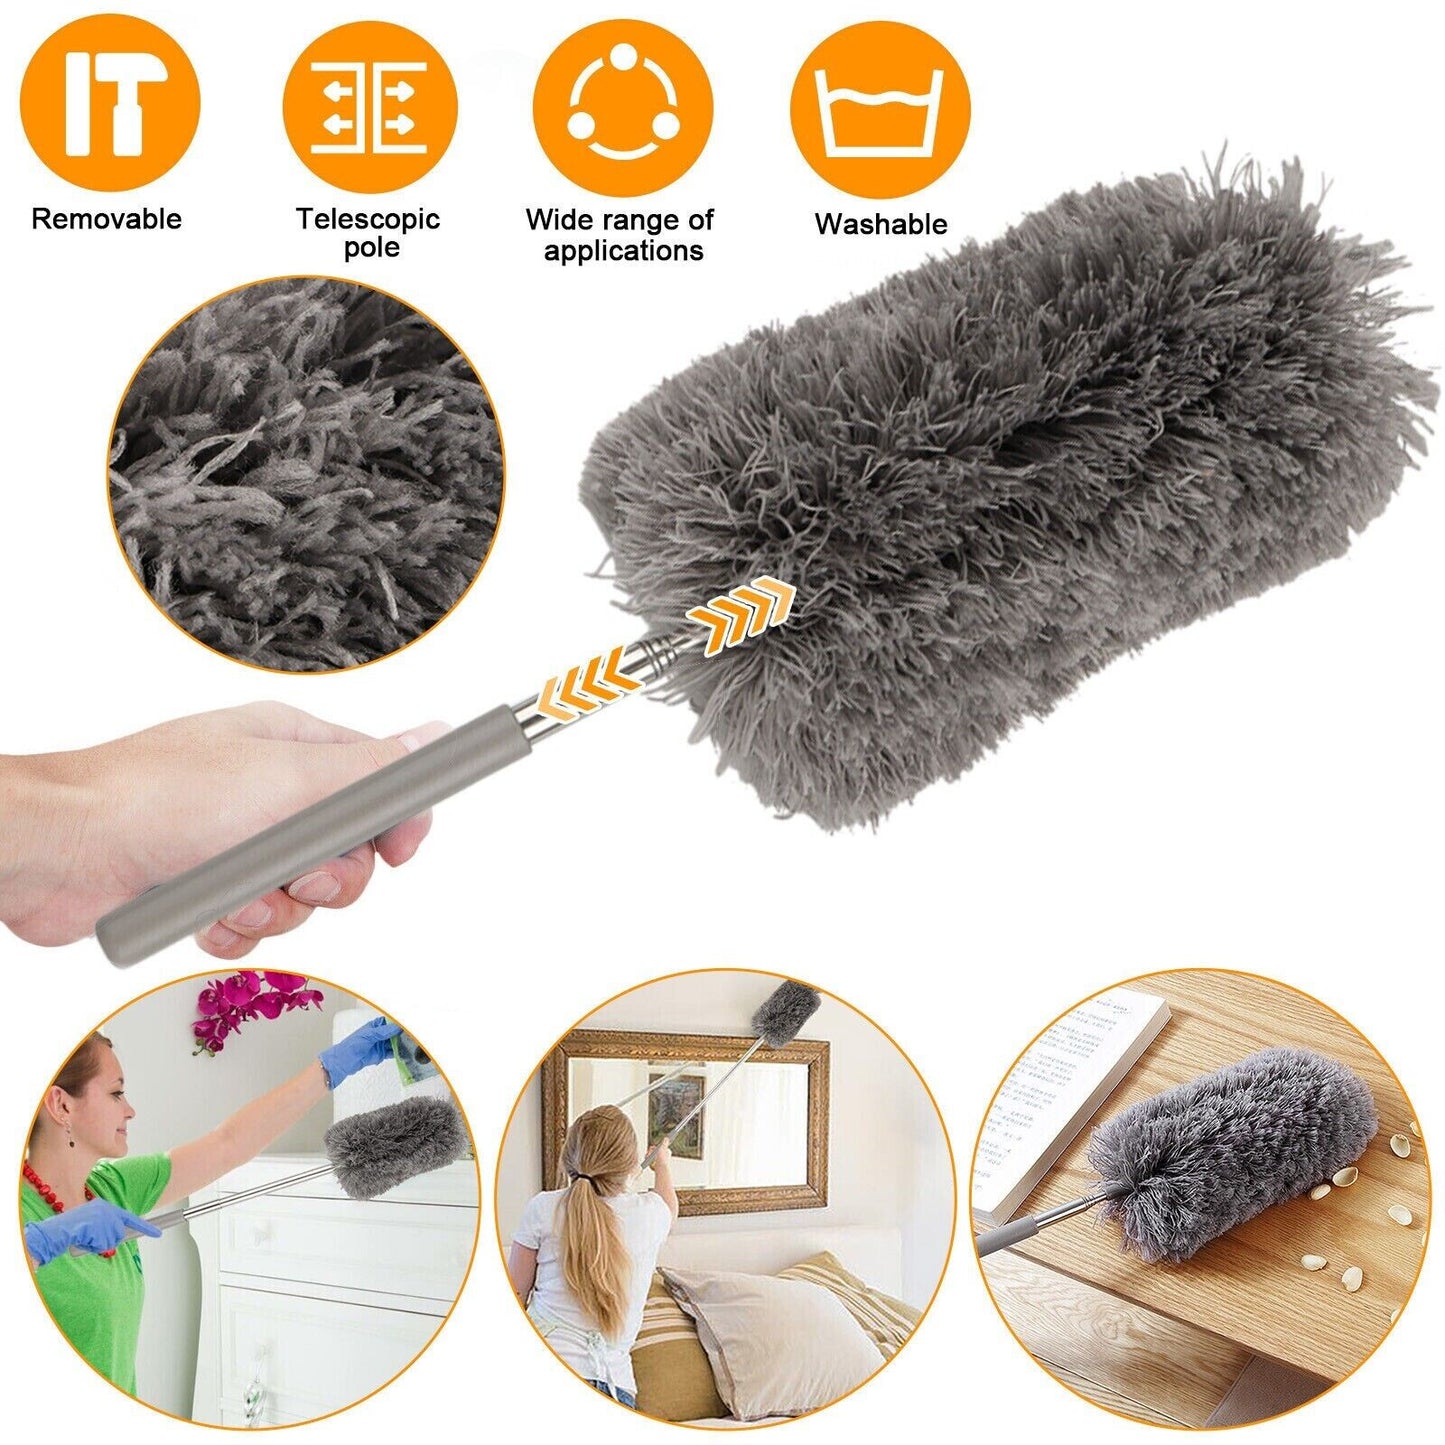 Microfiber Feather Duster Extendable Duster with 100 inches Extra Long Pole, Bendable Head & Long Handle Dusters for Cleaning Ceiling Fan, High Ceiling, Blinds, Furniture